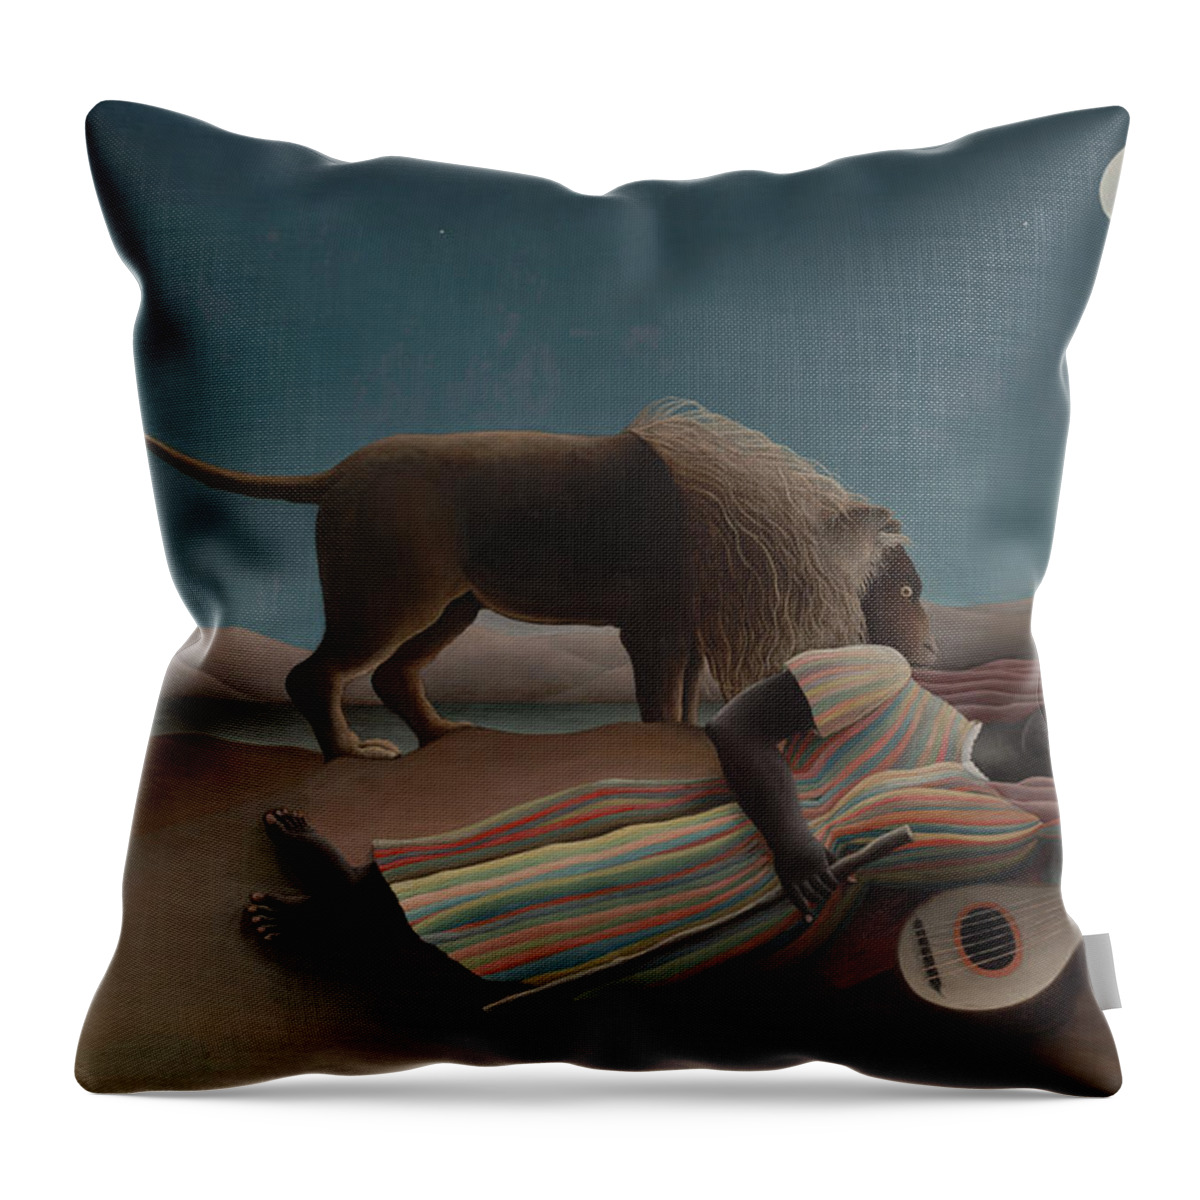 Henri Rousseau Throw Pillow featuring the painting The Sleeping Gypsy by Henri Rousseau